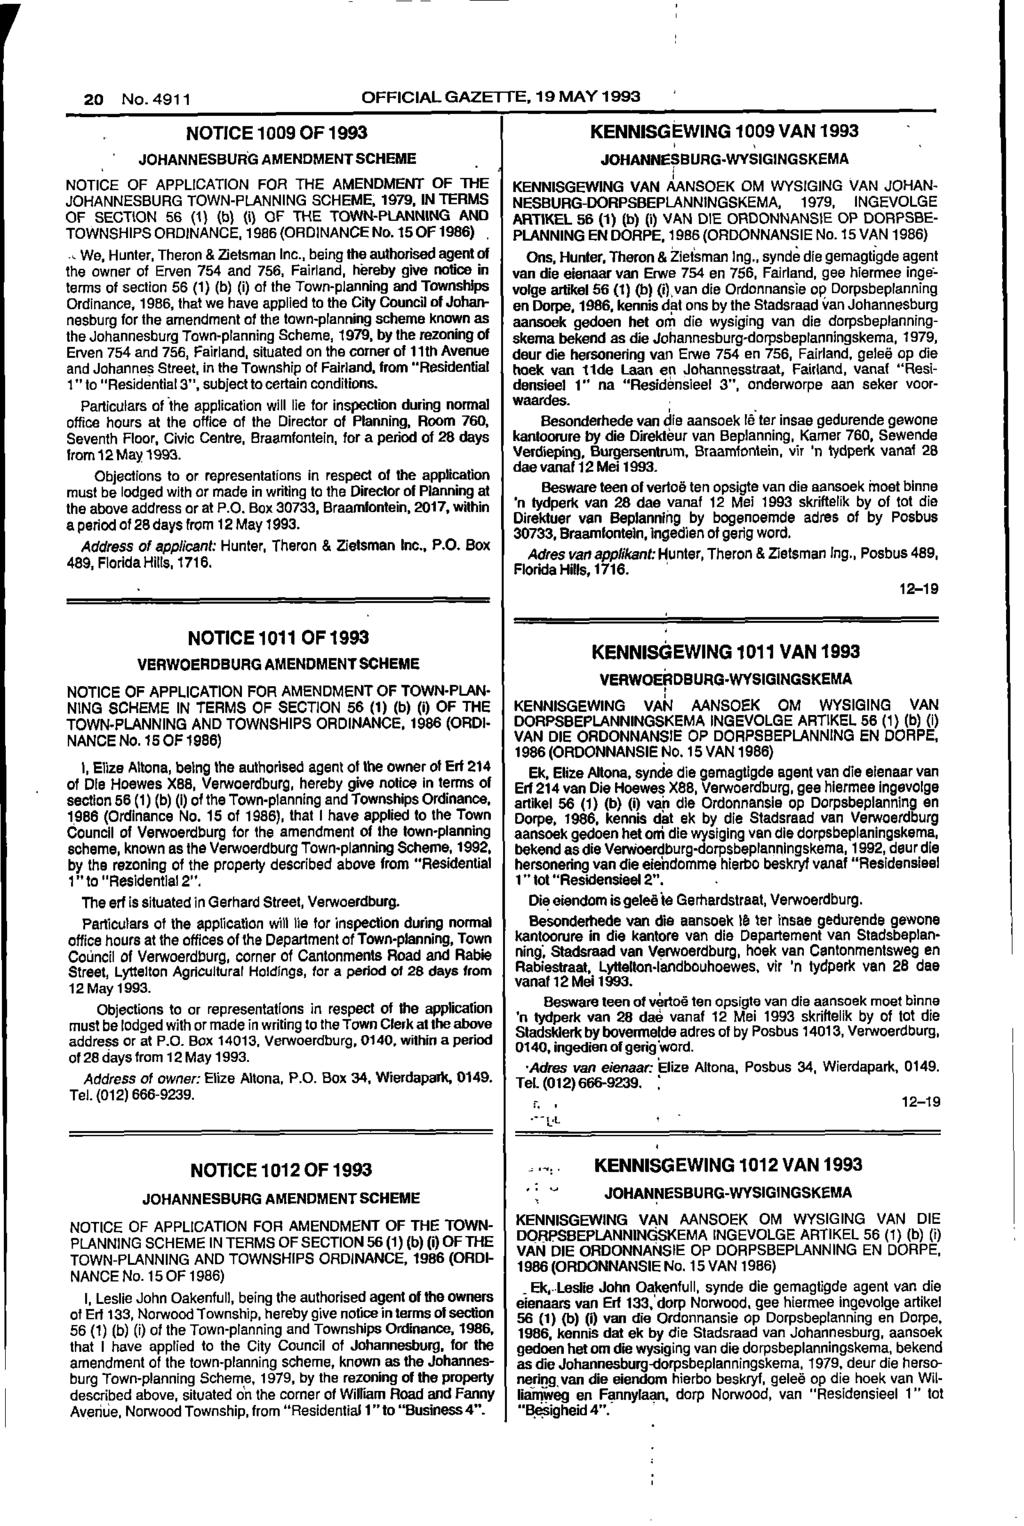 20 No 4911 OFFICIAL GAZETTE 19 MAY 1993 NOTICE 1009 OF 1993 KENNISGEWING 1009 VAN 1993 JOHANNESBURG AMENDMENT SCHEME JOHANNESBURG WYSIGINGSKEMA NOTICE OF APPLICATION FOR THE AMENDMENT OF THE